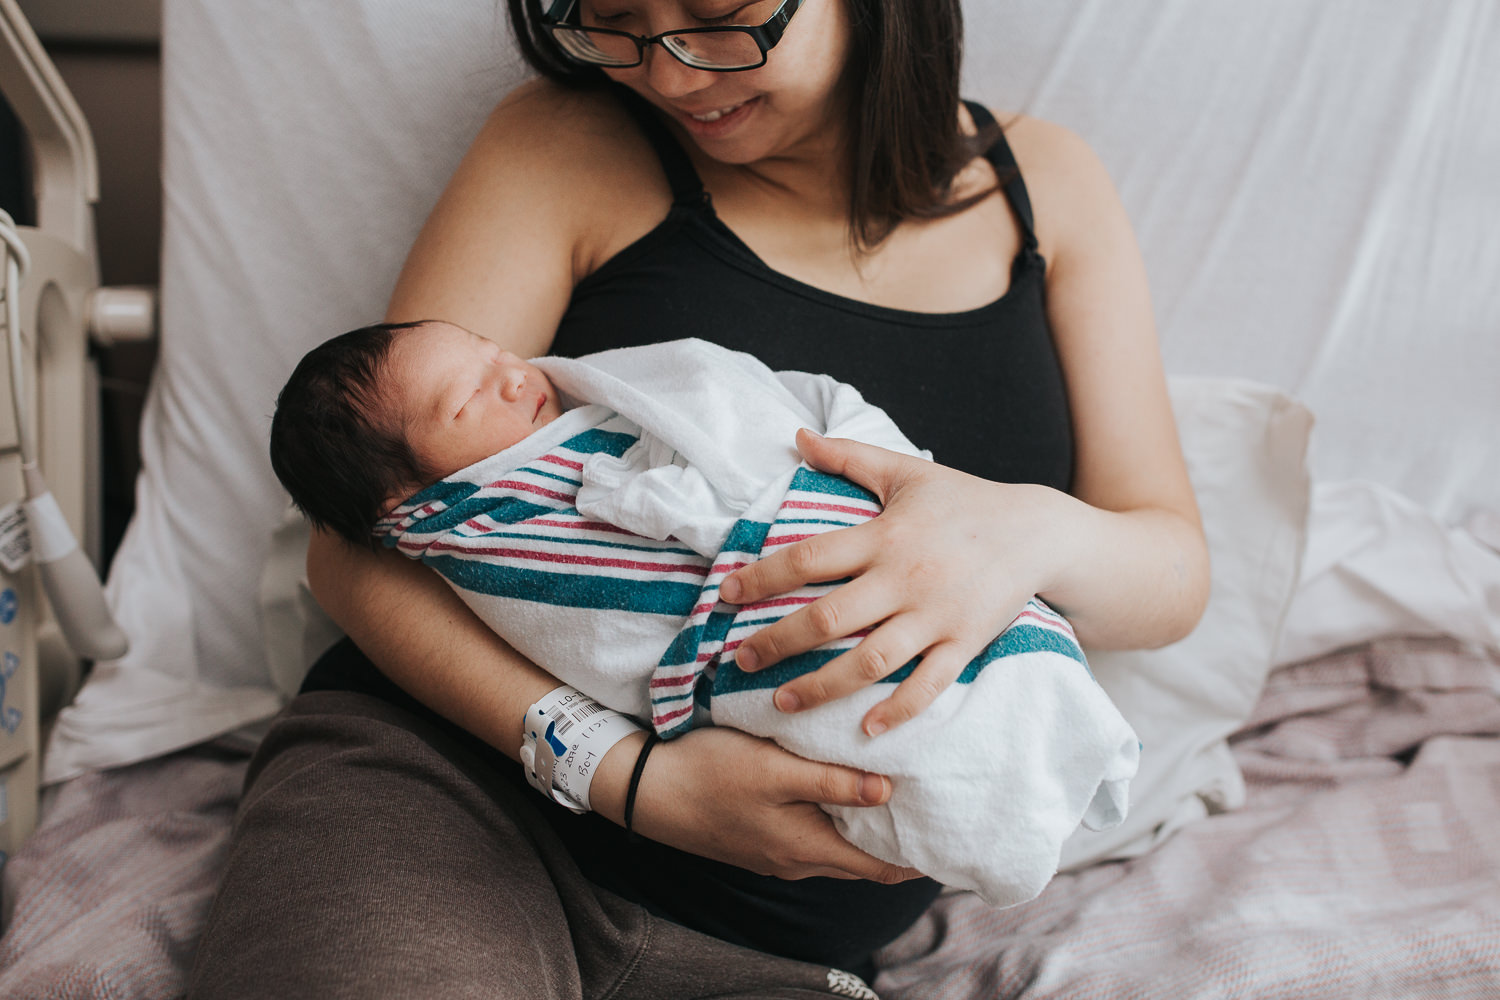 new mom sitting in hospital bed holding and looking at newborn baby son - Uxbridge Fresh 48 Photography